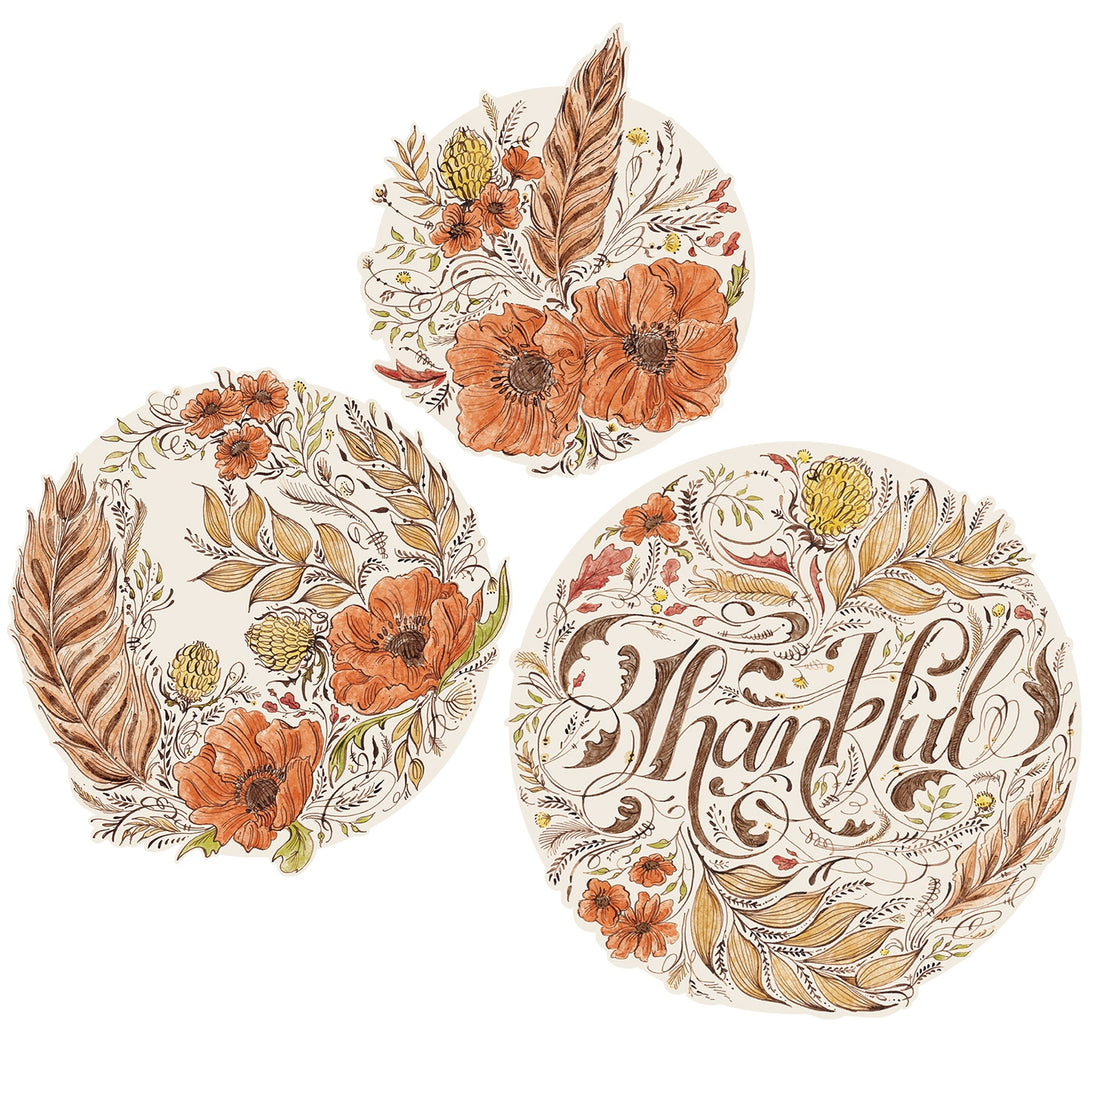 Three different sizes of round die-cut Serving Papers decorated with orange, brown and yellow florals, with &quot;Thankful&quot; written in a beautiful script on the largest one.